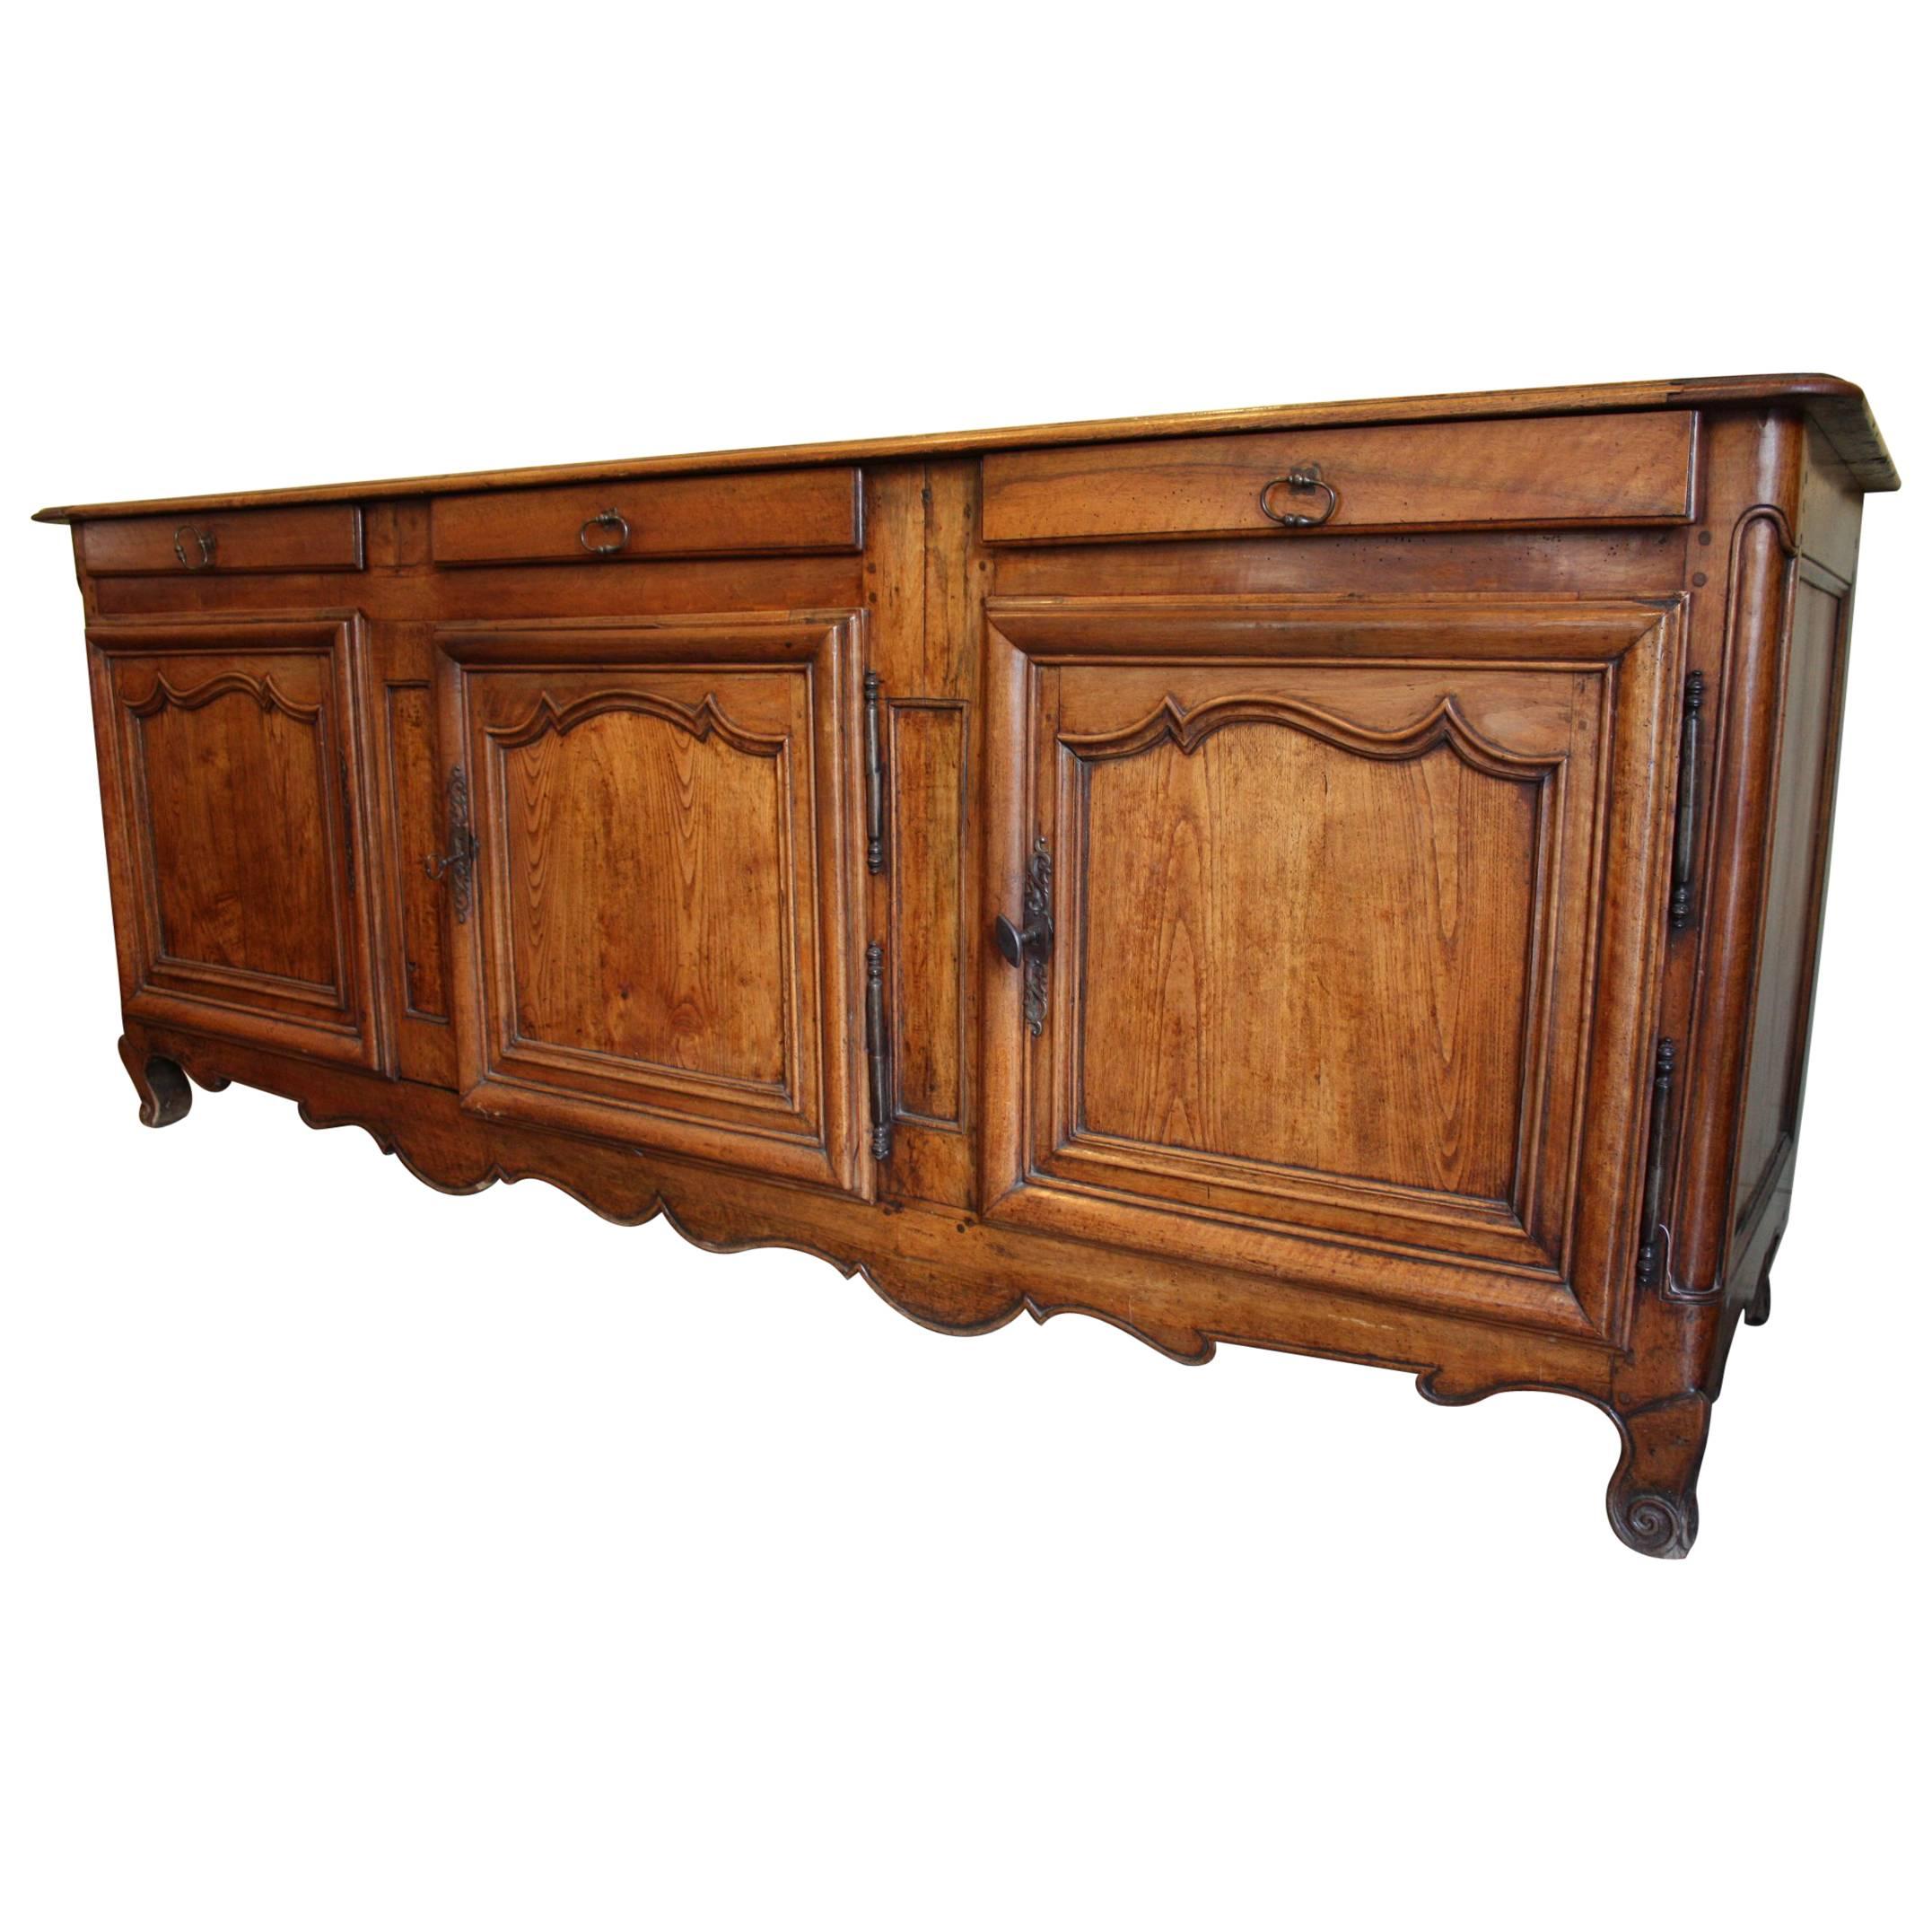 French, 19th Century Provencal Long Walnut Enfilade Buffet